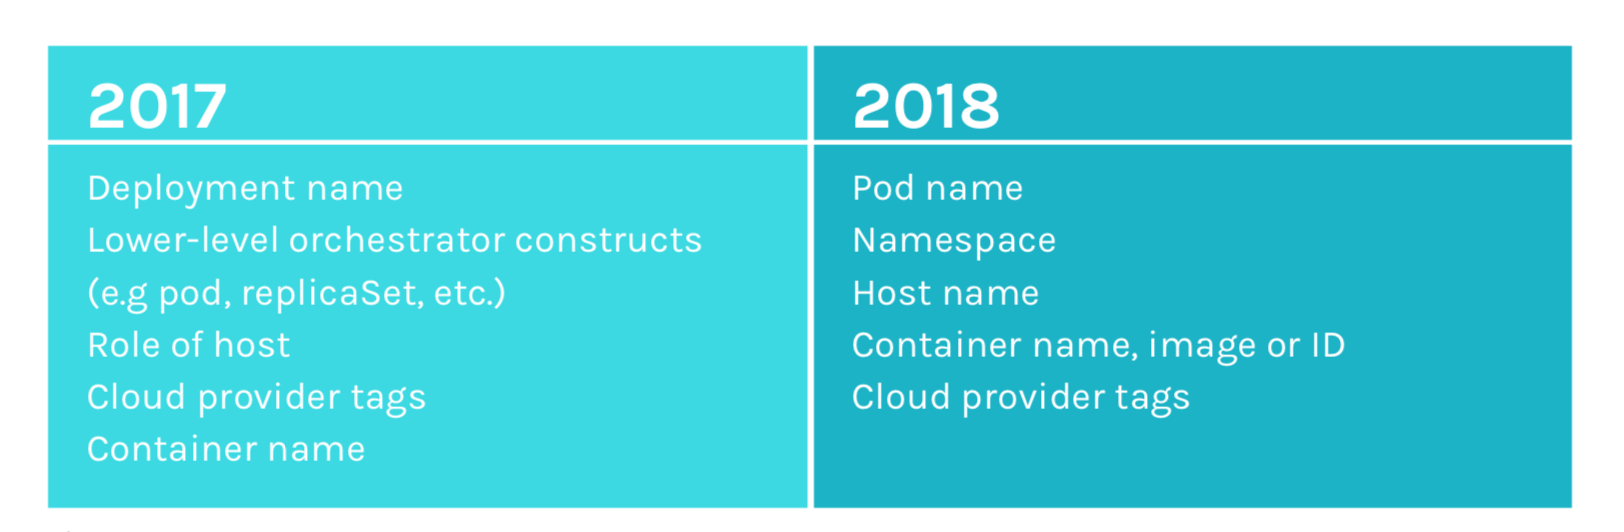 Kubernetes pod and namespace rises to top of alert scoping in 2018.